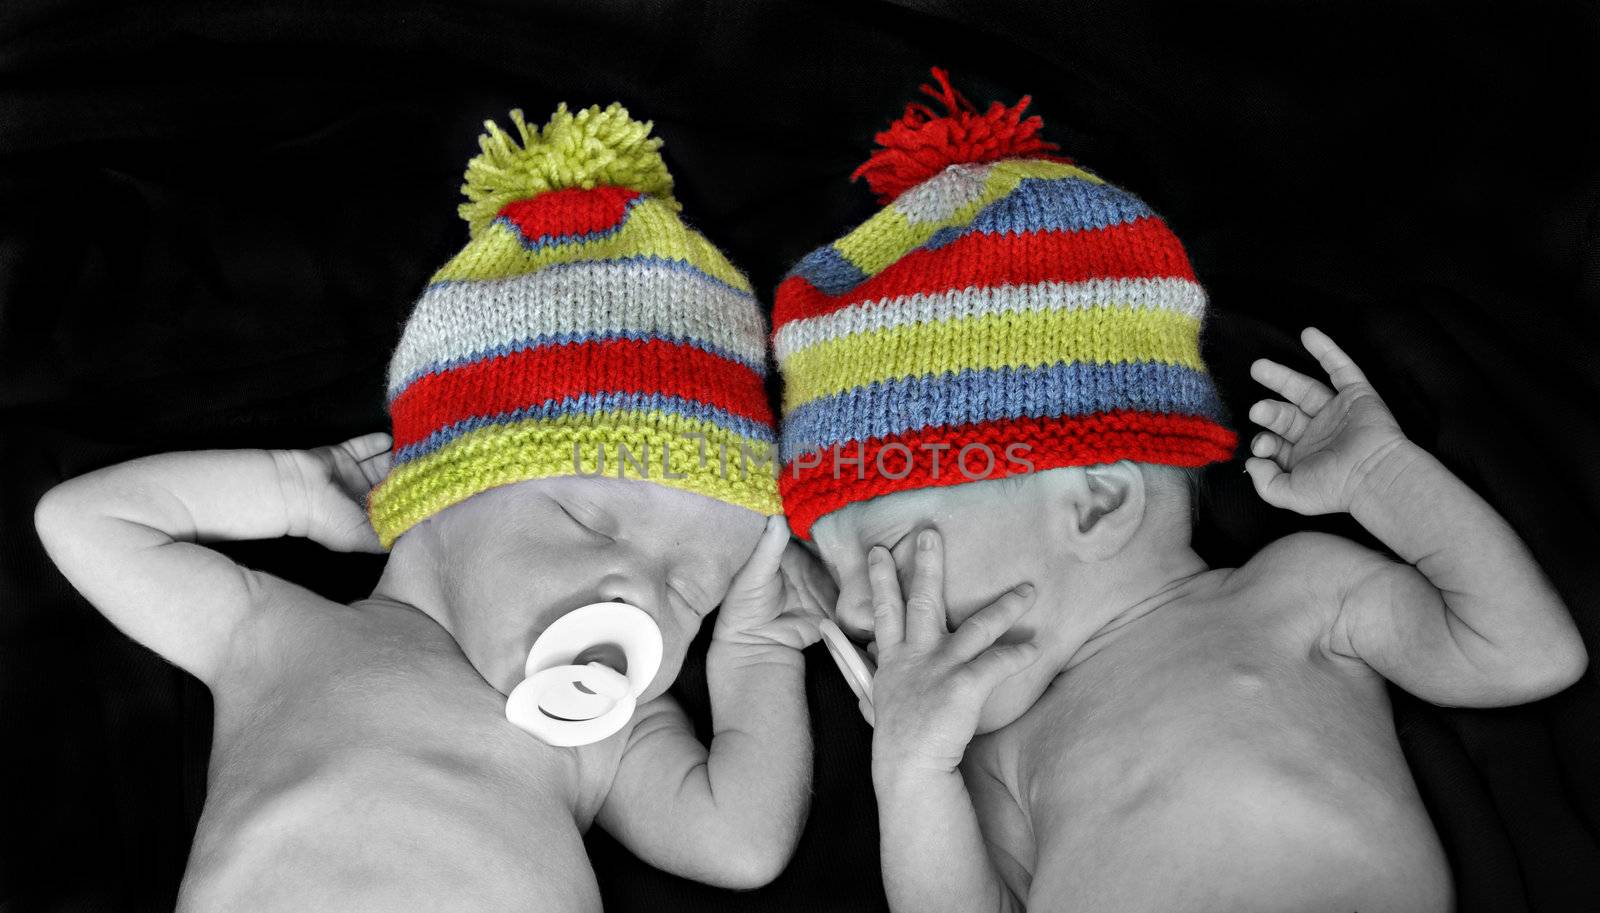 New born twins with colorful striped hats by tish1